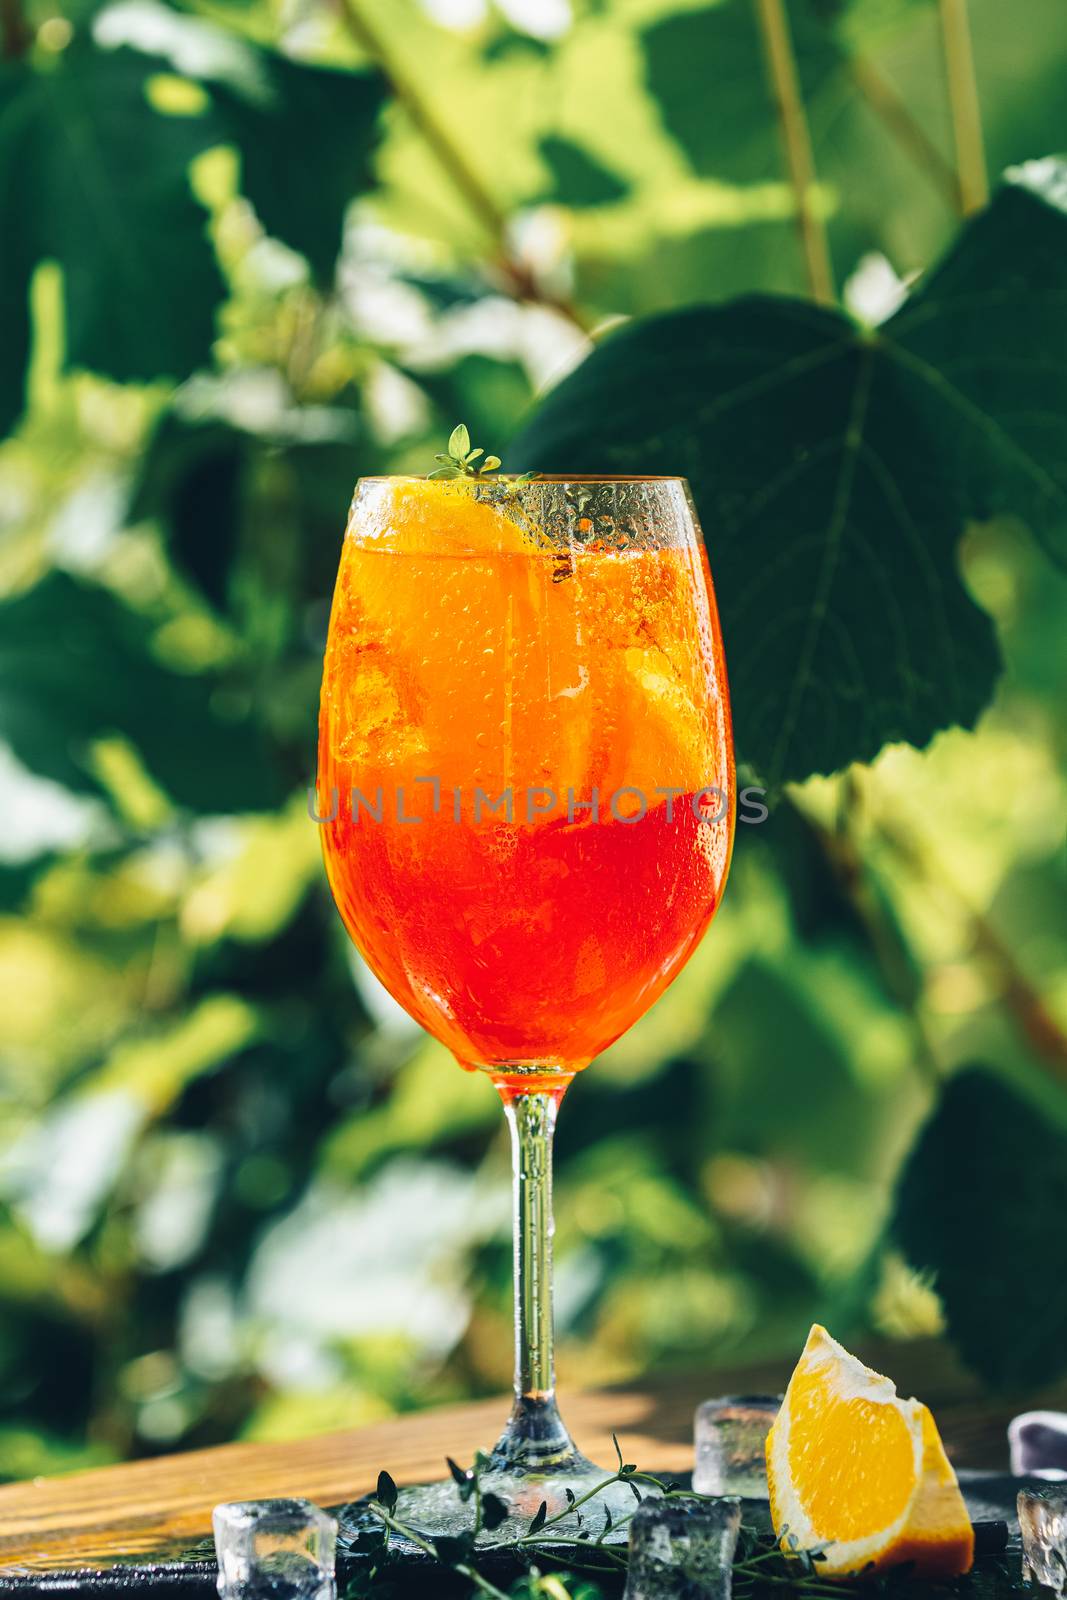 Aperol spritz cocktail in big wine glass close up with oranges, summer Italian fresh alcohol cold drink. Sunny garden with vineyard background, summer mood concept, selective focus